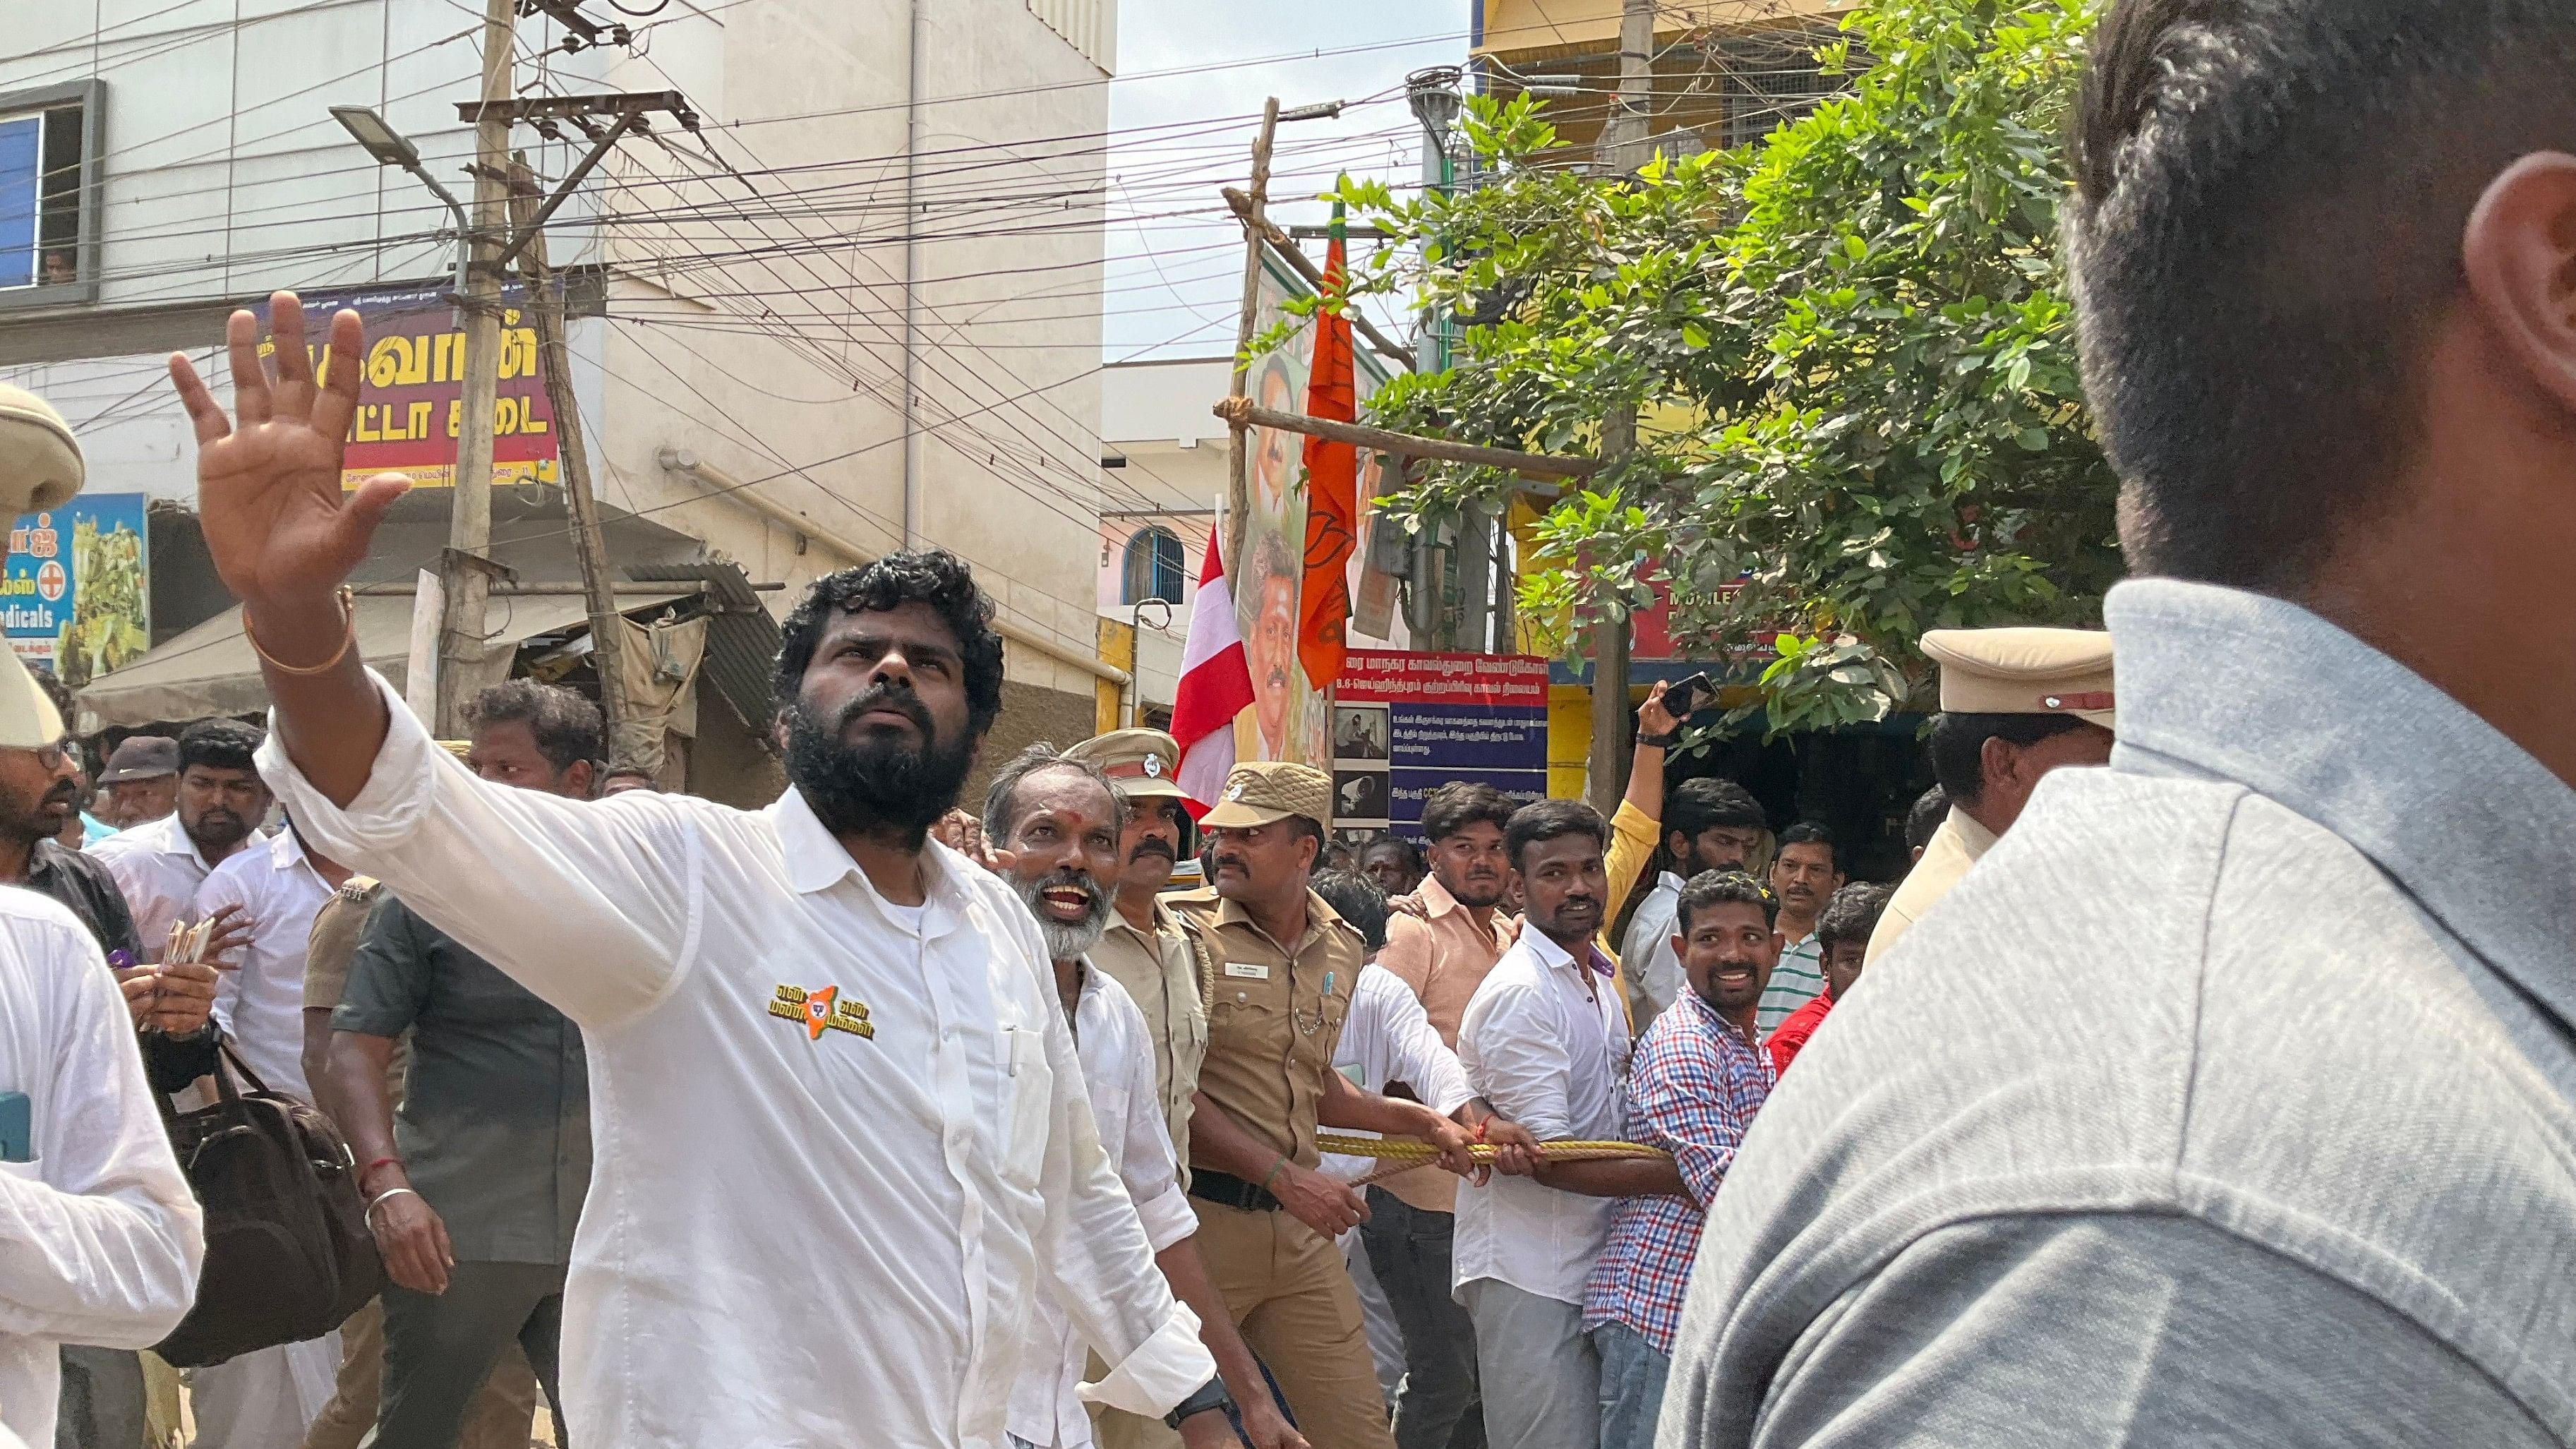 <div class="paragraphs"><p>At 10:30 am, Annamalai reaches Jaihindpuram in Madurai after two impromptu stops to a rousing welcome by BJP cadres, and performances of traditional Tamil folk art, Thappattam and Kattakal.</p></div>